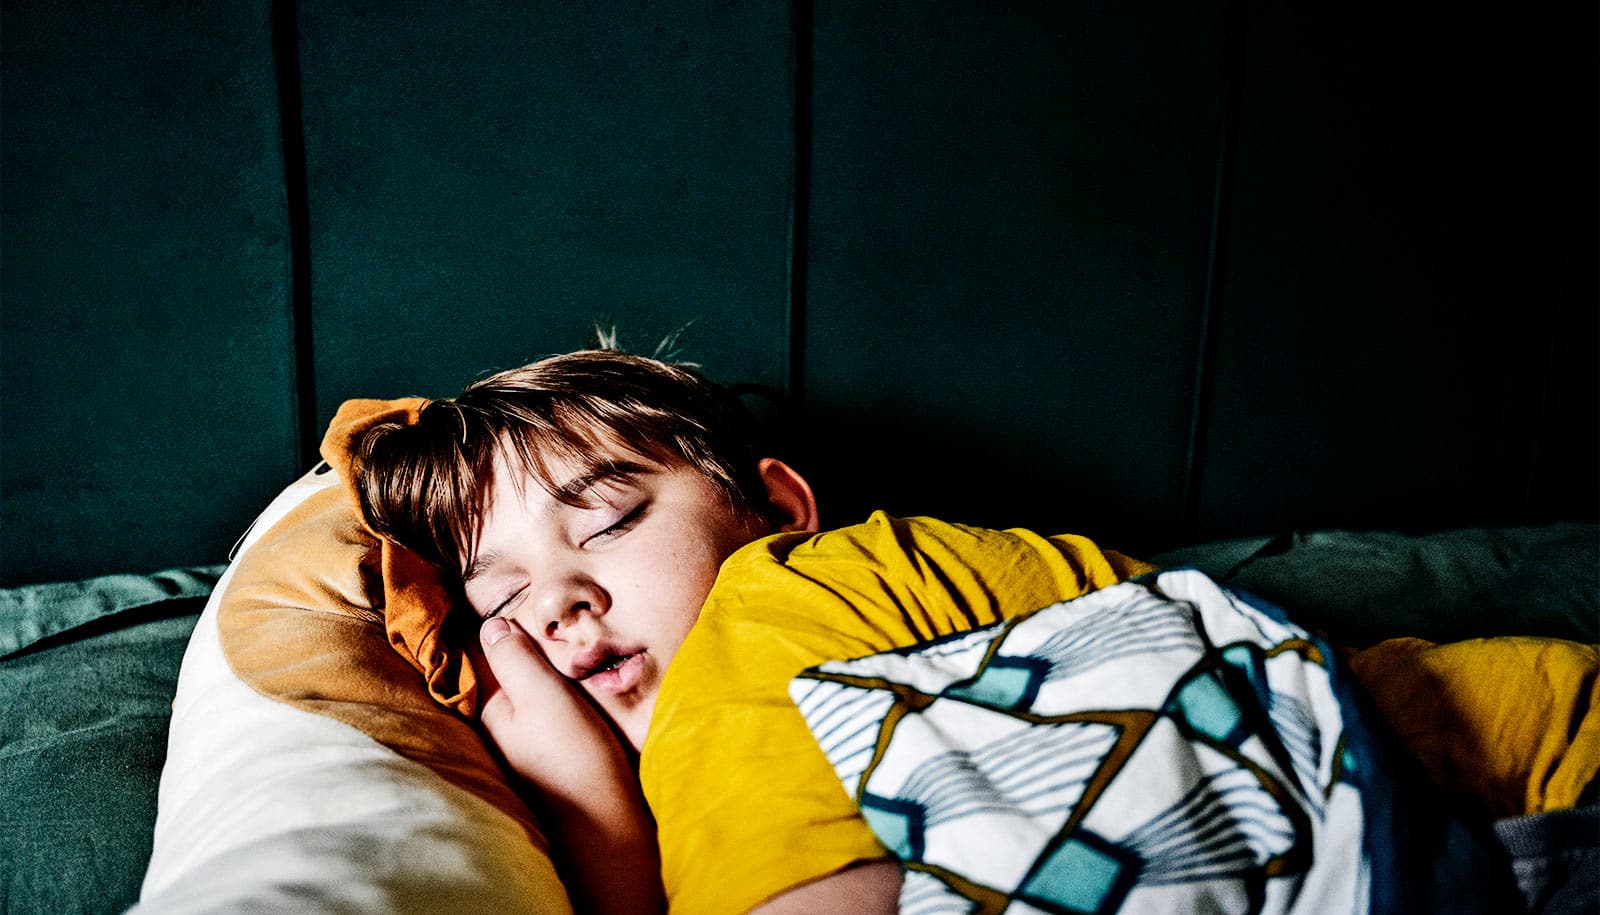 More sleep and less screen time benefit unmedicated kids with ADHD